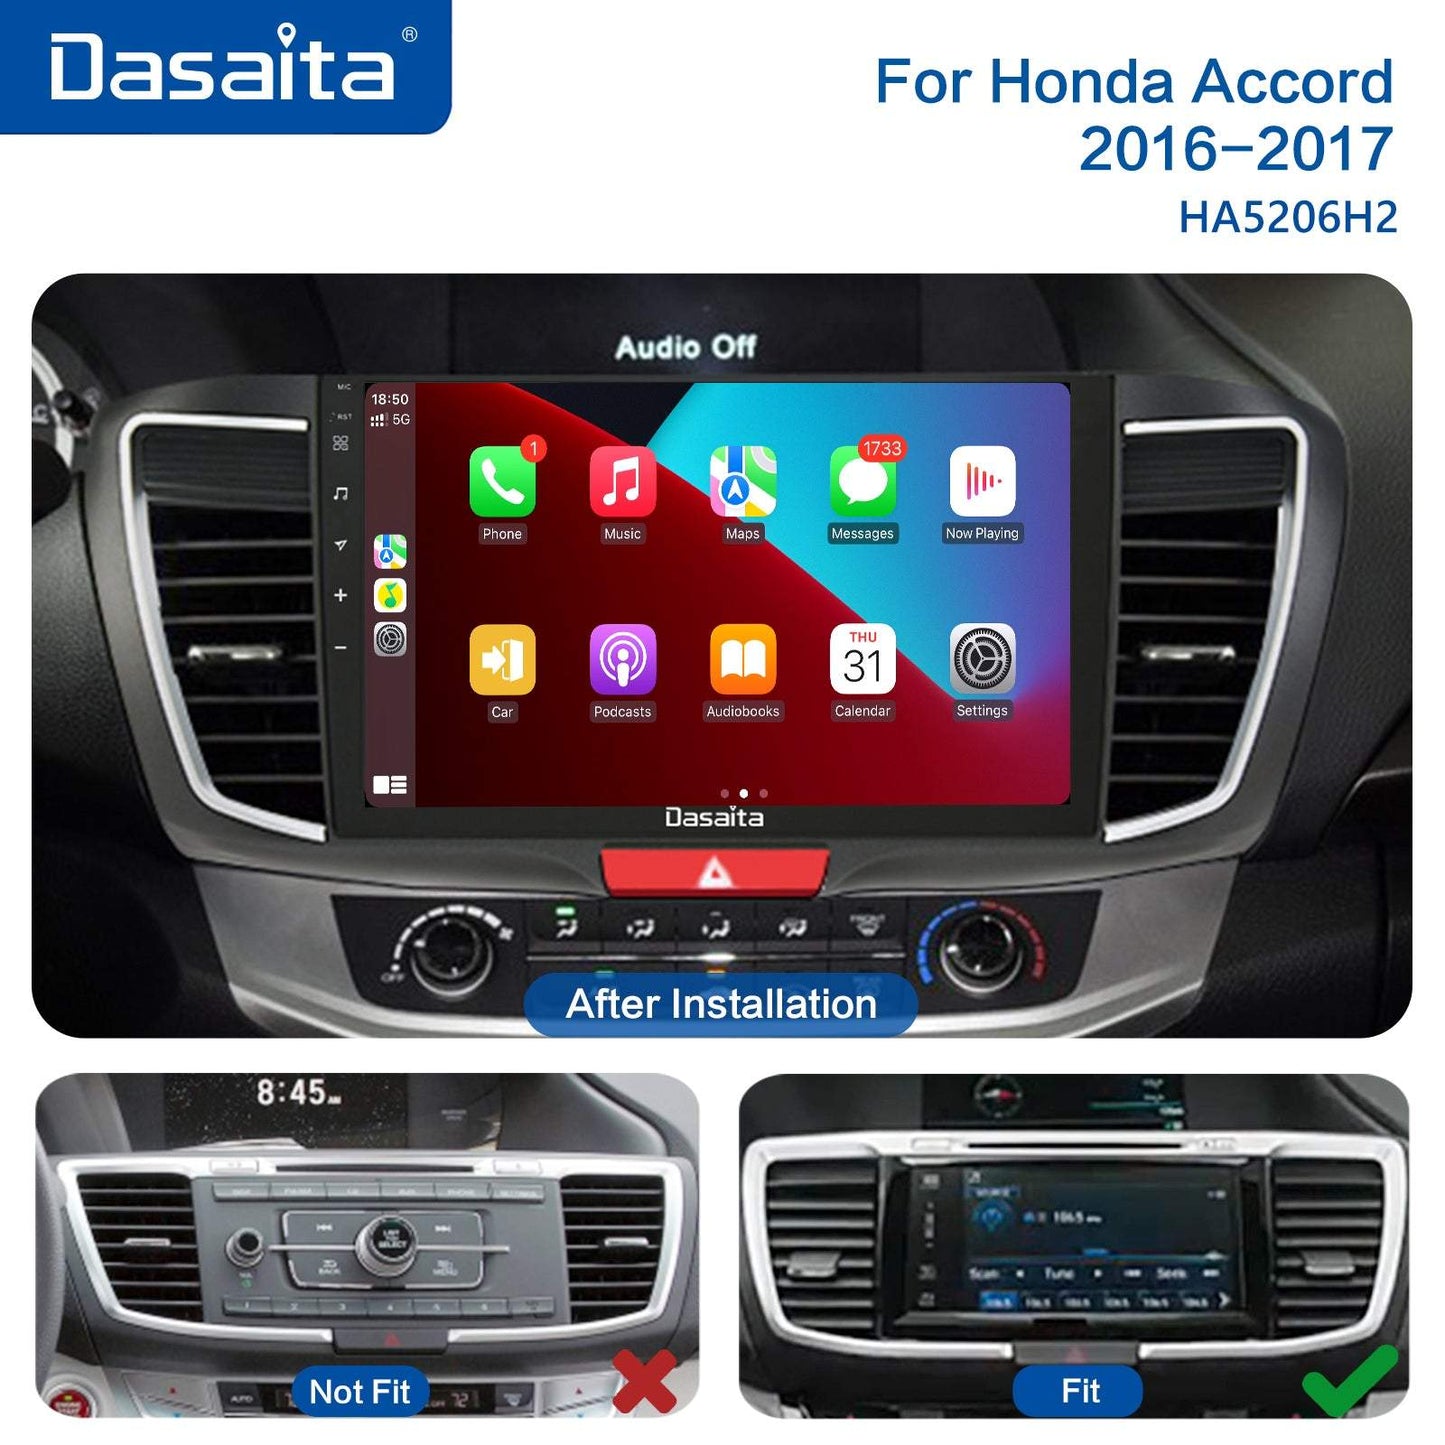 Dasaita Scout10 10.2 inch for Honda Accord 2013 2014 2015 2016 2017 Car Android Stereo Apple Carplay Android Auto GPS Navigation Wifi 1280*720 Video